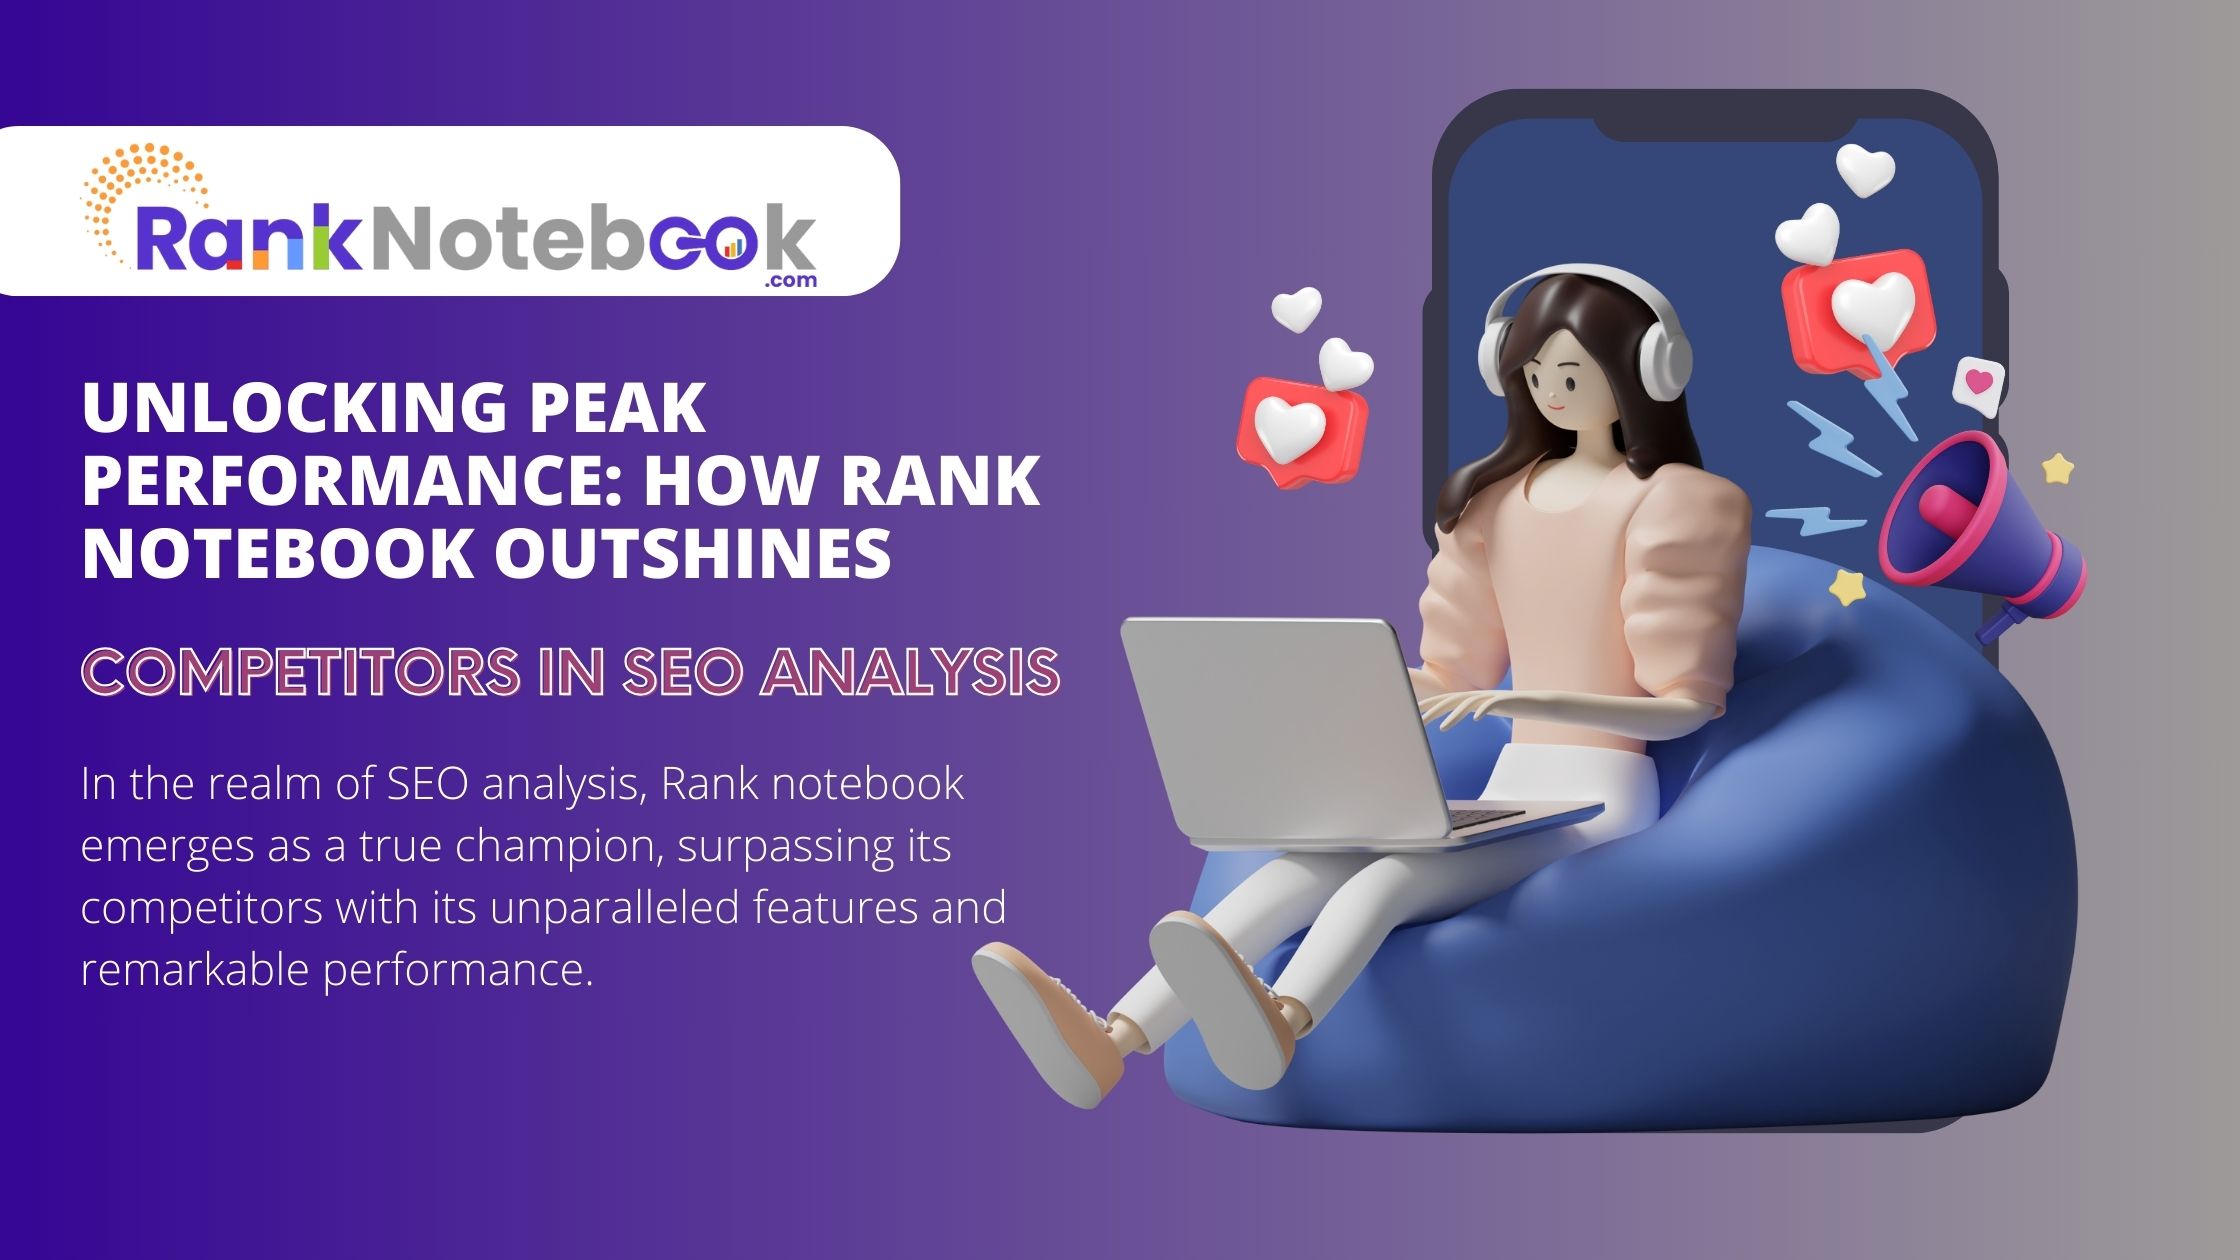 Unlocking Peak Performance: How Rank Notebook Outshines Competitors in SEO Analysis